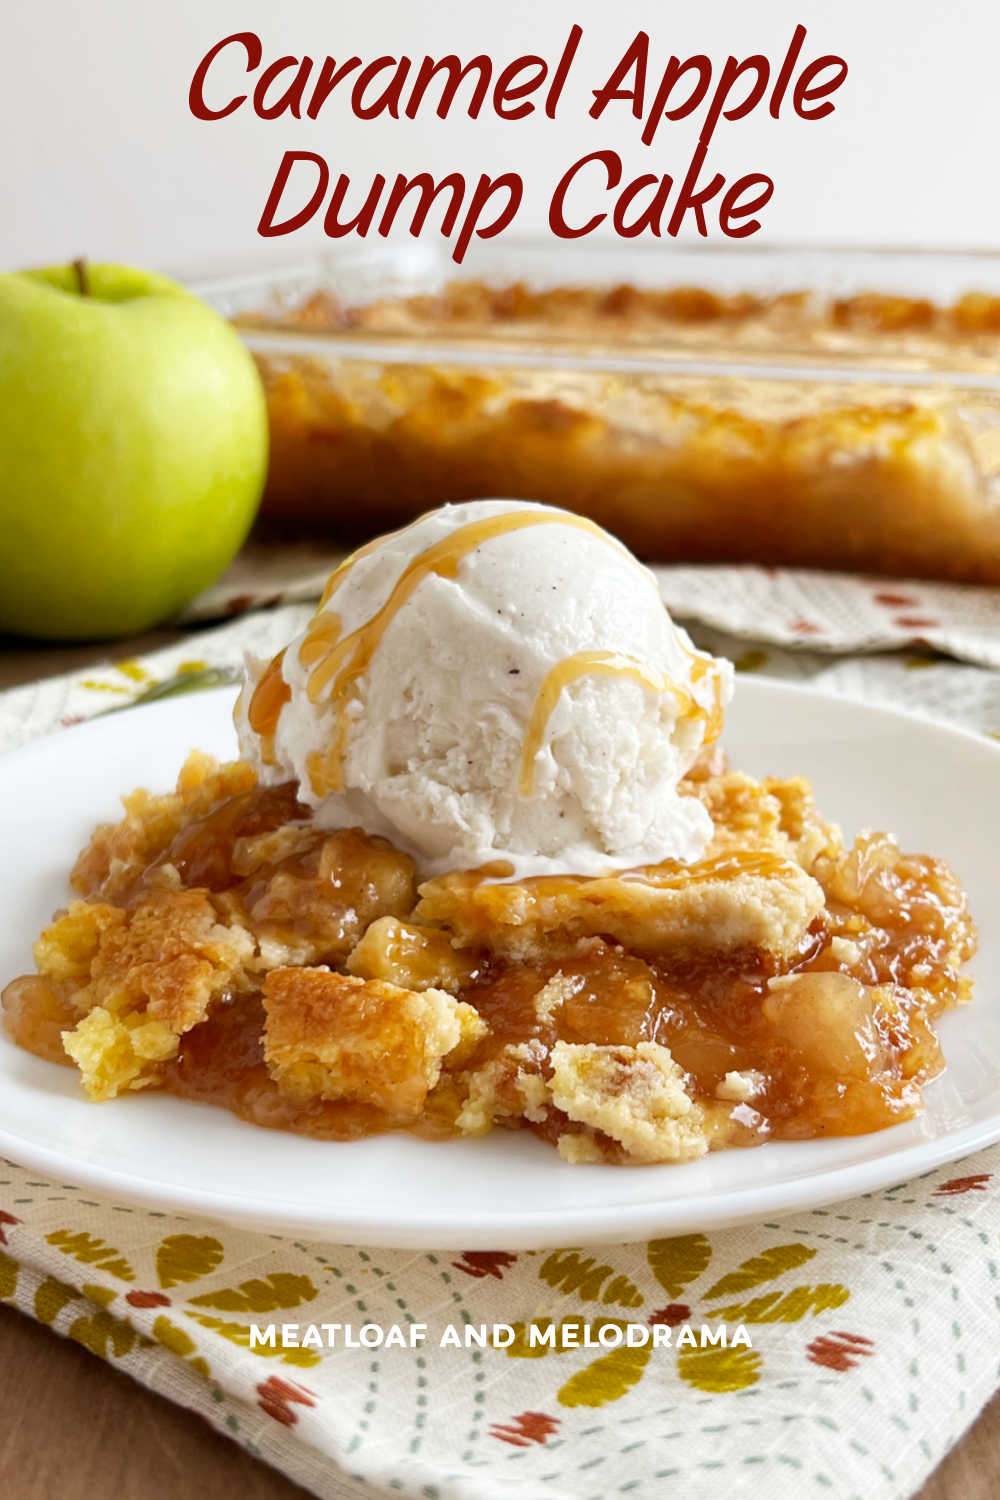 Caramel Apple Dump Cake is an easy dessert made with yellow cake mix, apple filling and caramel bits and baked until golden brown and delicious. This easy recipe makes the perfect fall dessert! via @meamel